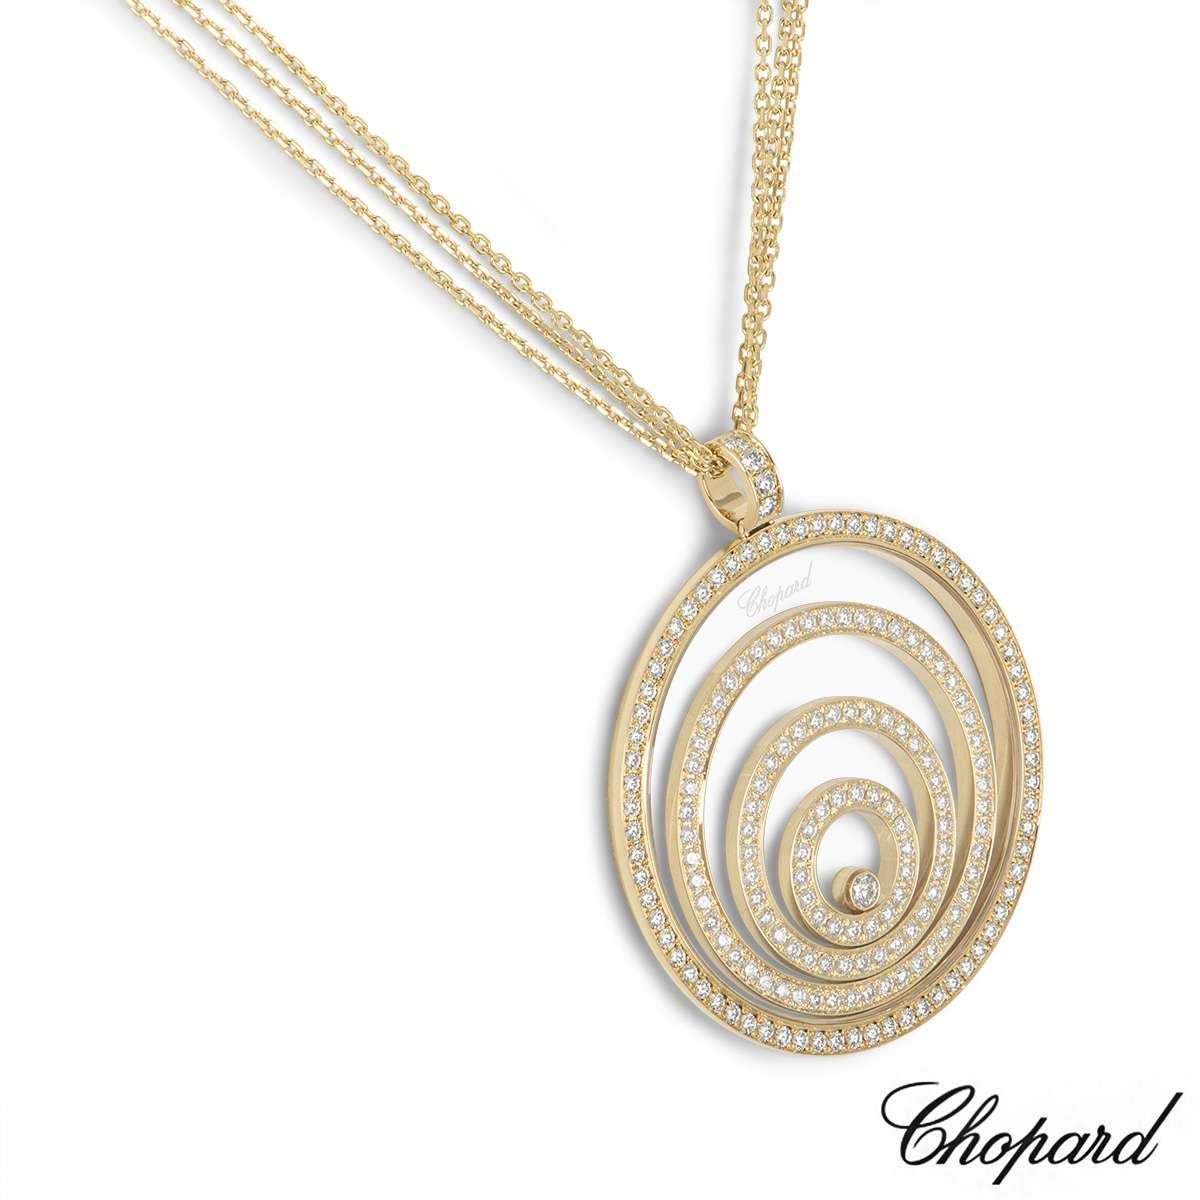 An 18k yellow gold pendant from the Happy Spirit collection by Chopard. The circular pendant consists of a diamond set bale and outer case with 3 diamond set circular floating motifs, complimented by a single floating diamond in the centre. The